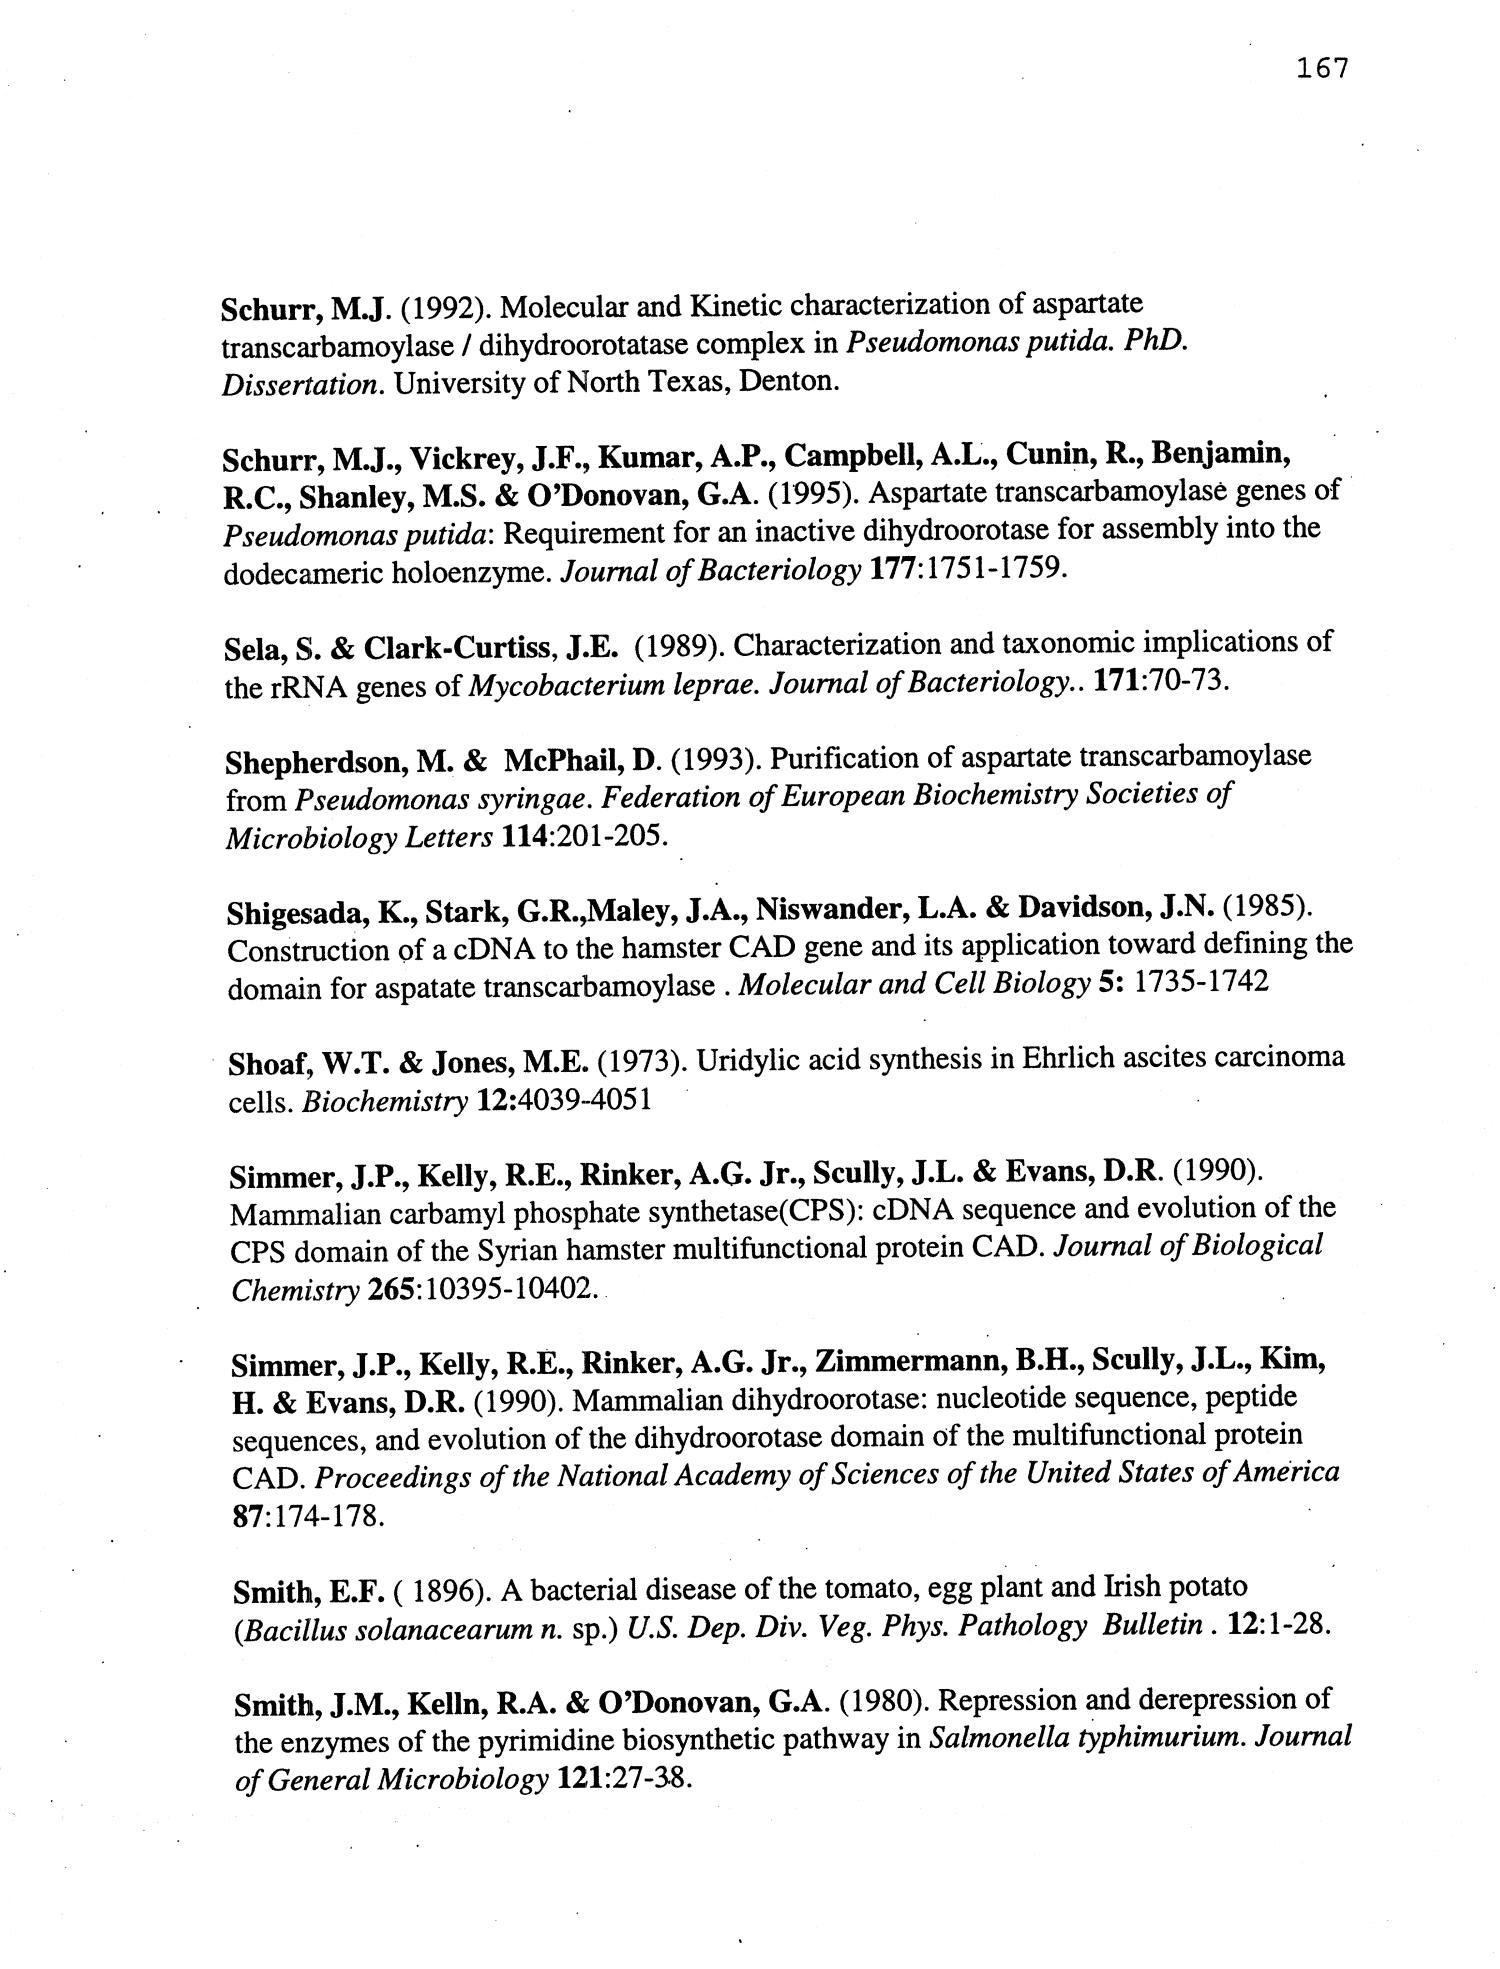 Comparative Biochemistry And Evolution Of Aspartate Transcarbamoylase From Diverse Bacteria Page 167 Unt Digital Library